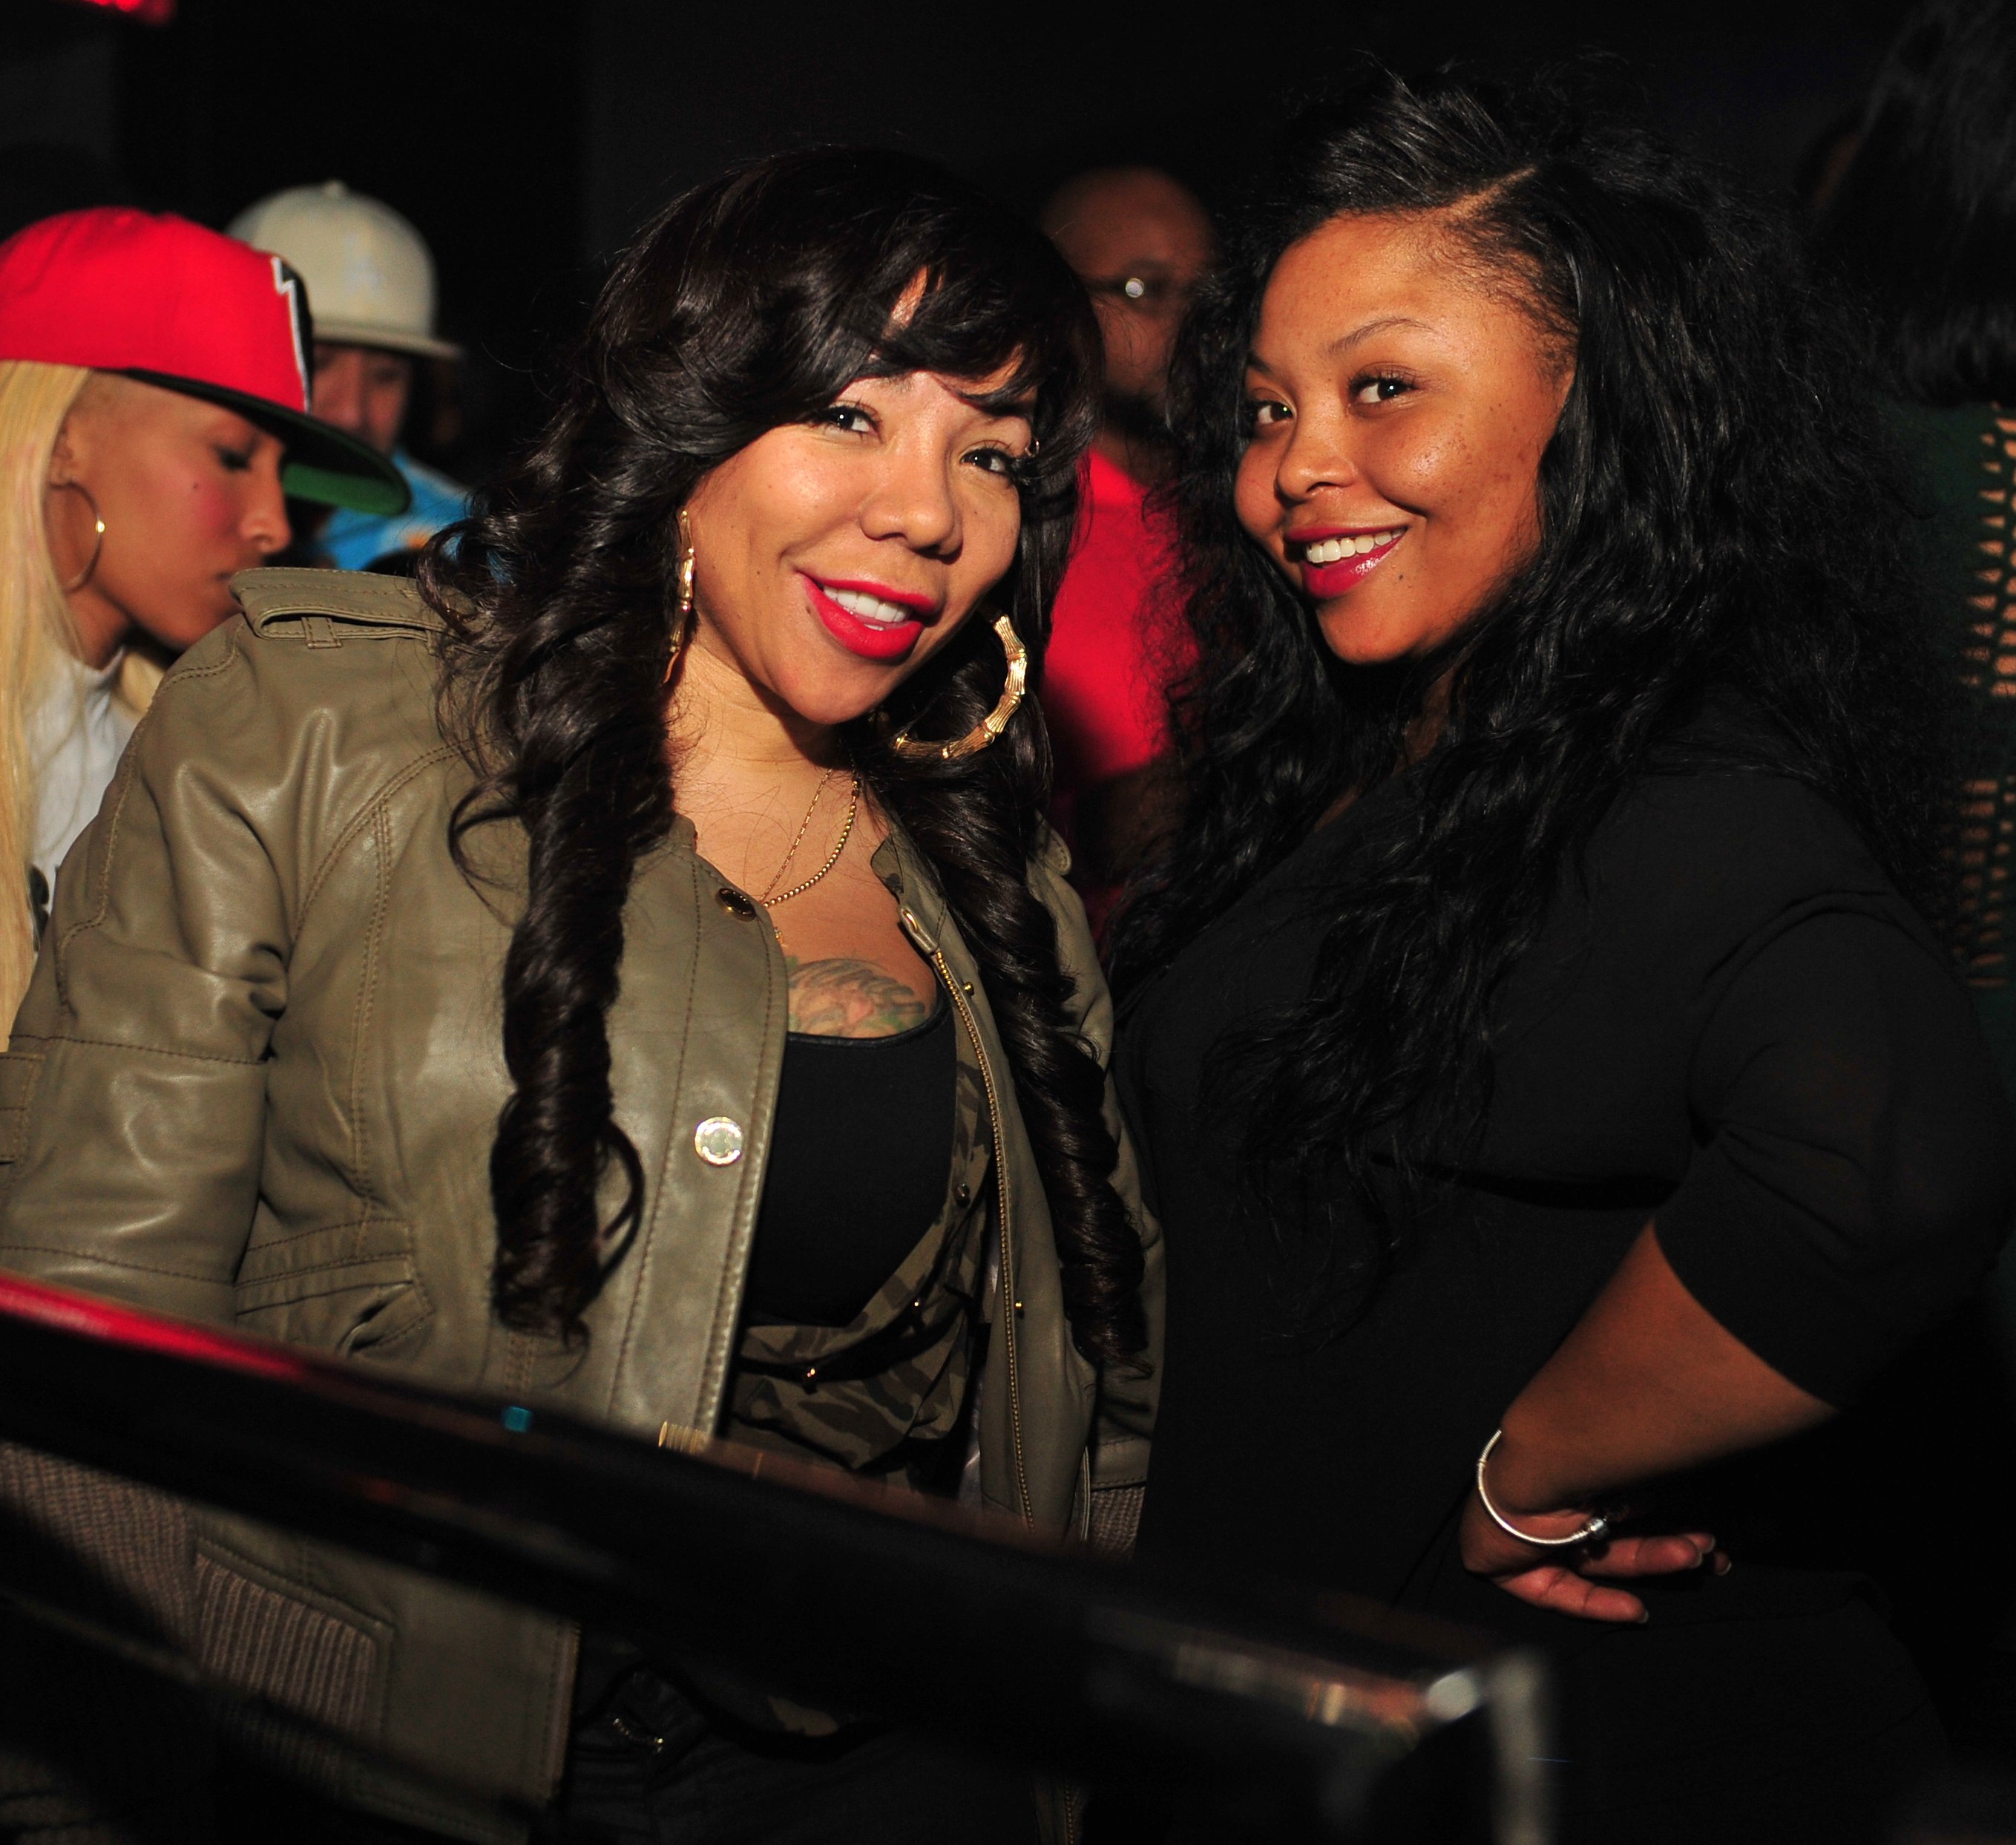 Tiny & Shekinah Jo’s Beef Continues As Singer Says “Stop Harassing Me”